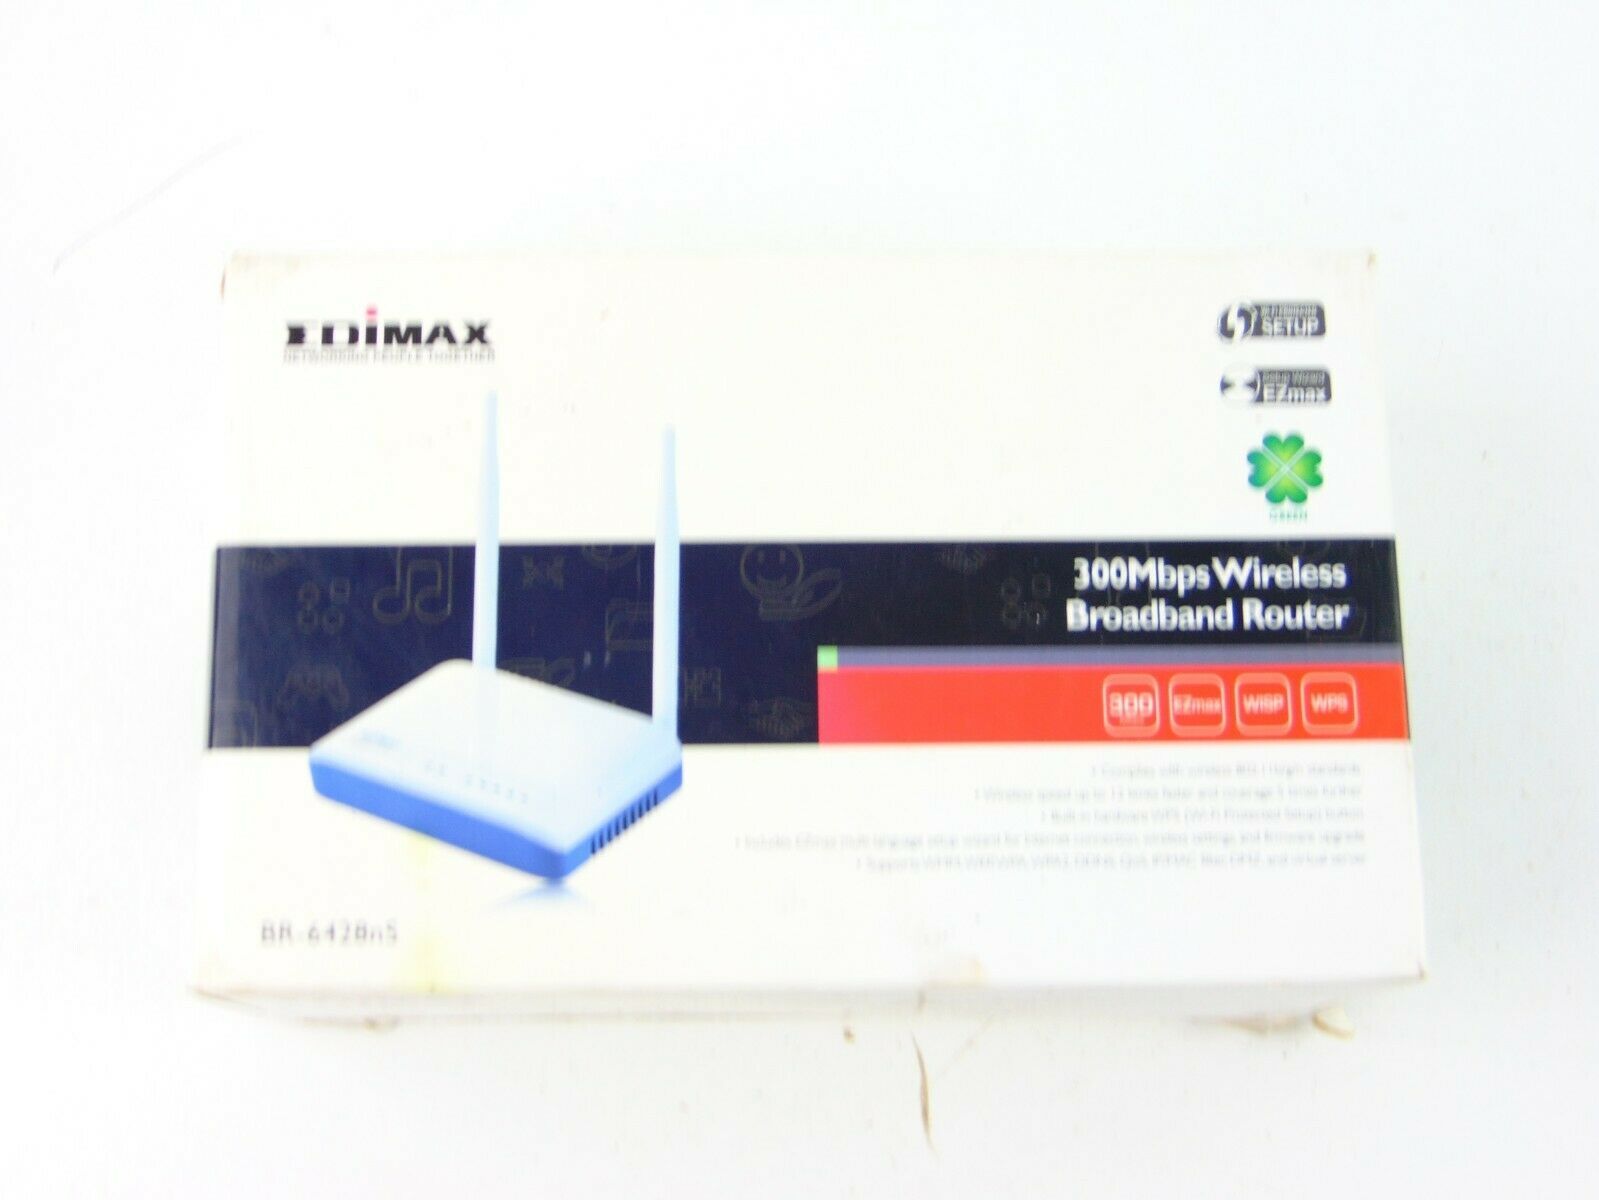 Edimax BR-6428NS Broadband Router 300Mbps Wireless - $39.59